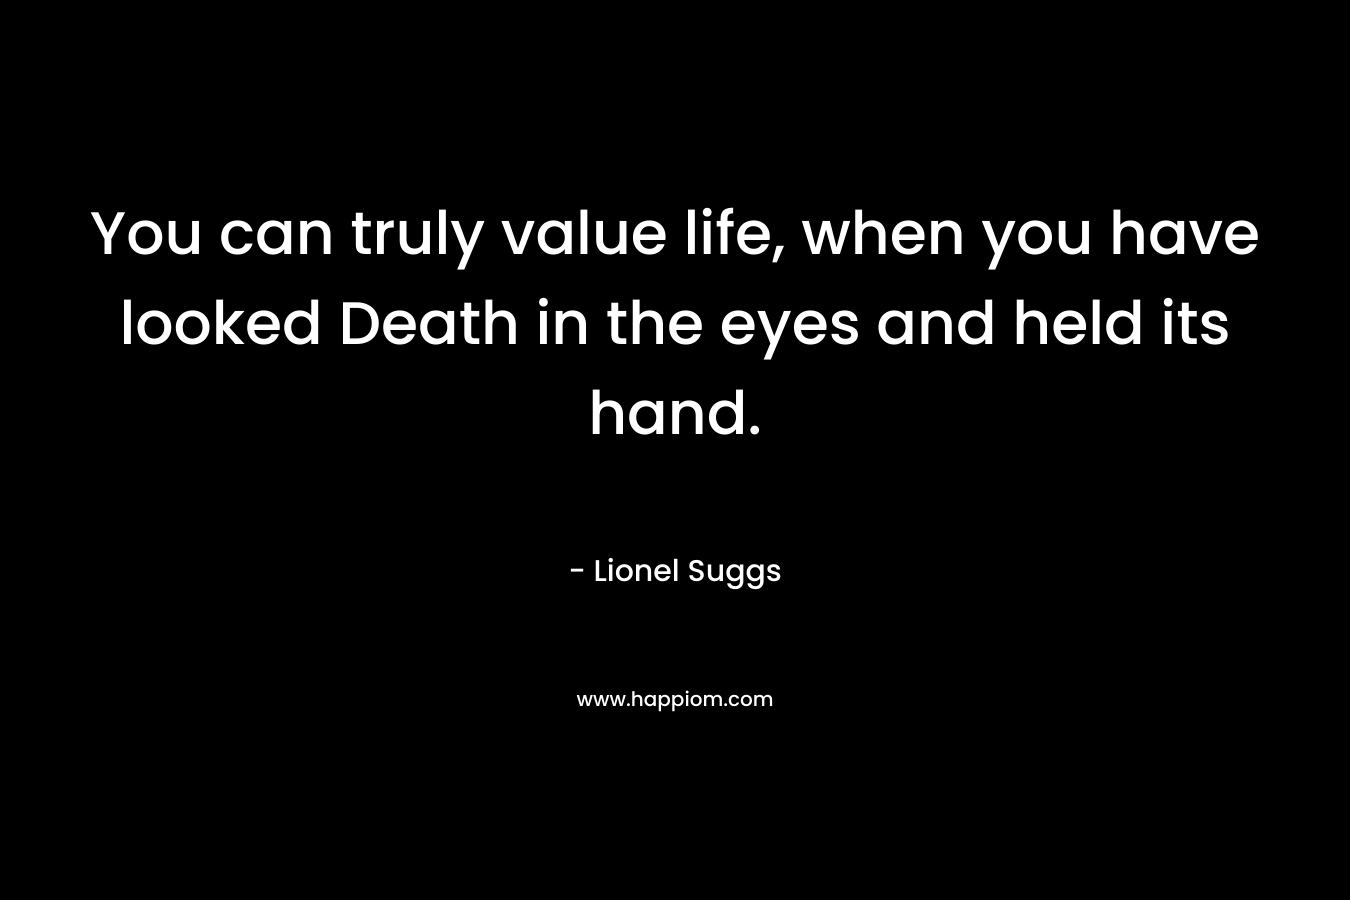 You can truly value life, when you have looked Death in the eyes and held its hand.